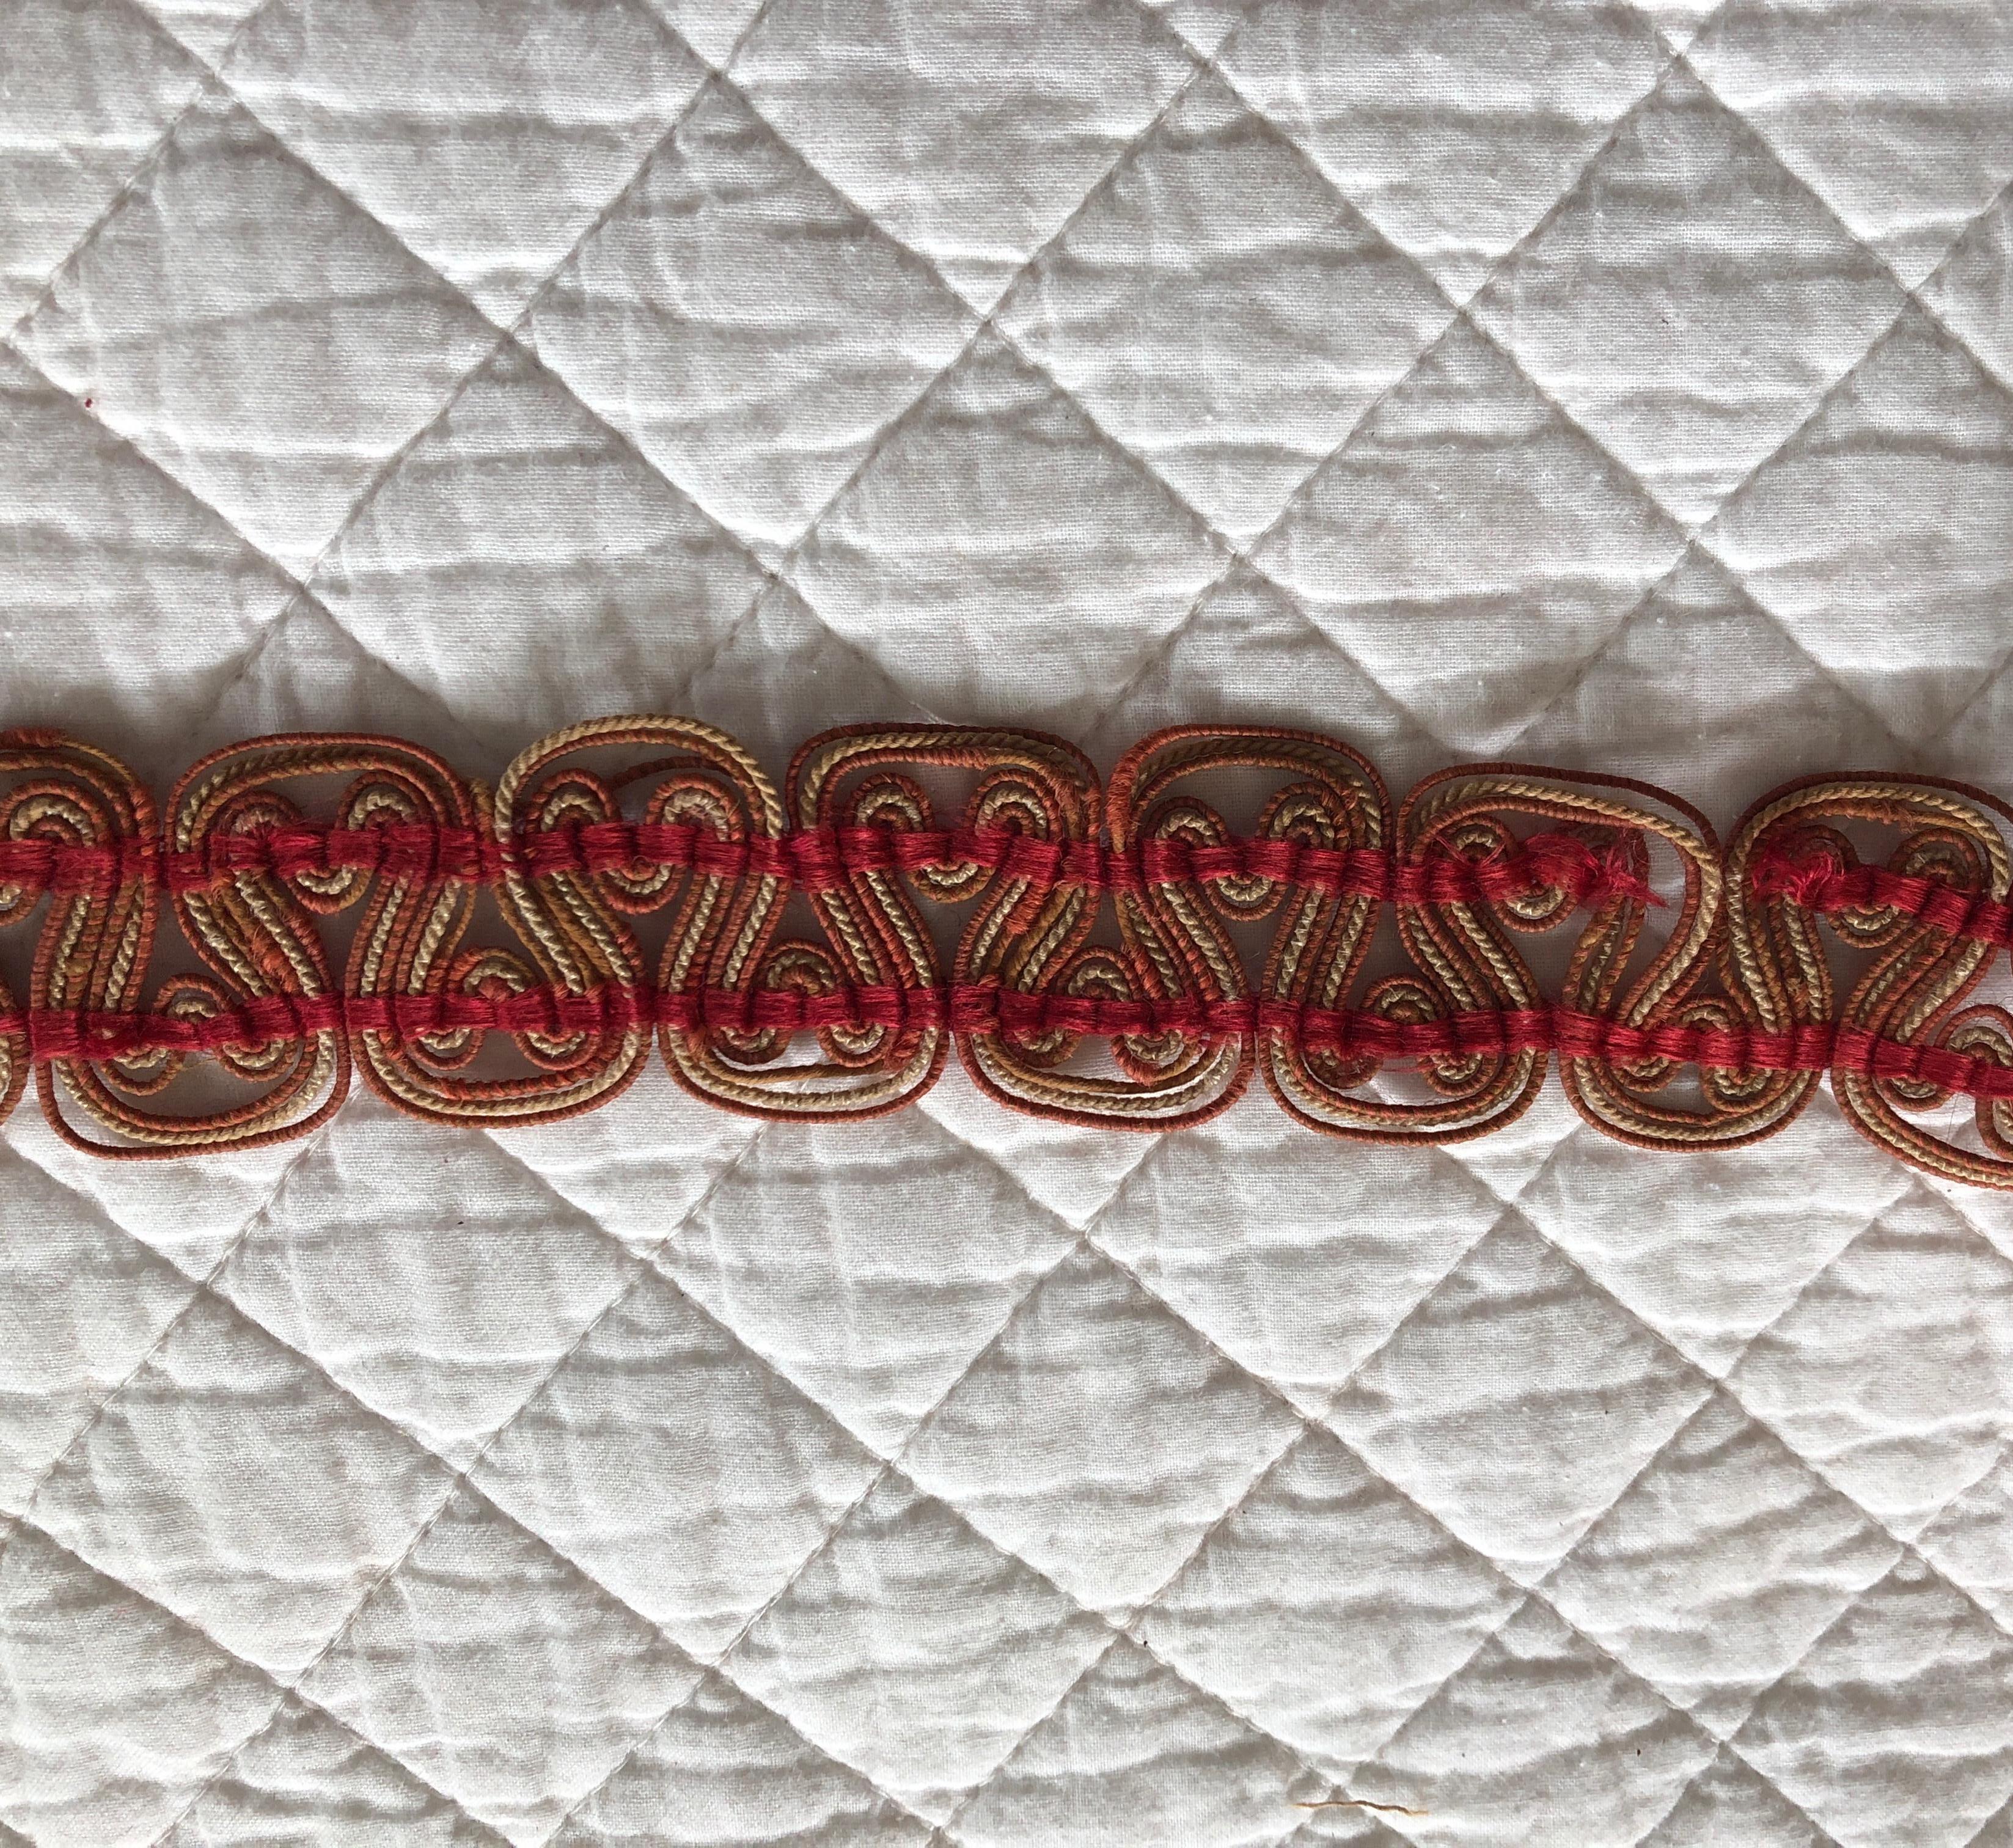 Antique red and gold French woven and braided trims lot,
Sold as is.
Ideal for pillows or upholstery.
Fragment sizes:
50 x 2.5
54 x 2.5
46 x 2.5
73 x 2.5.